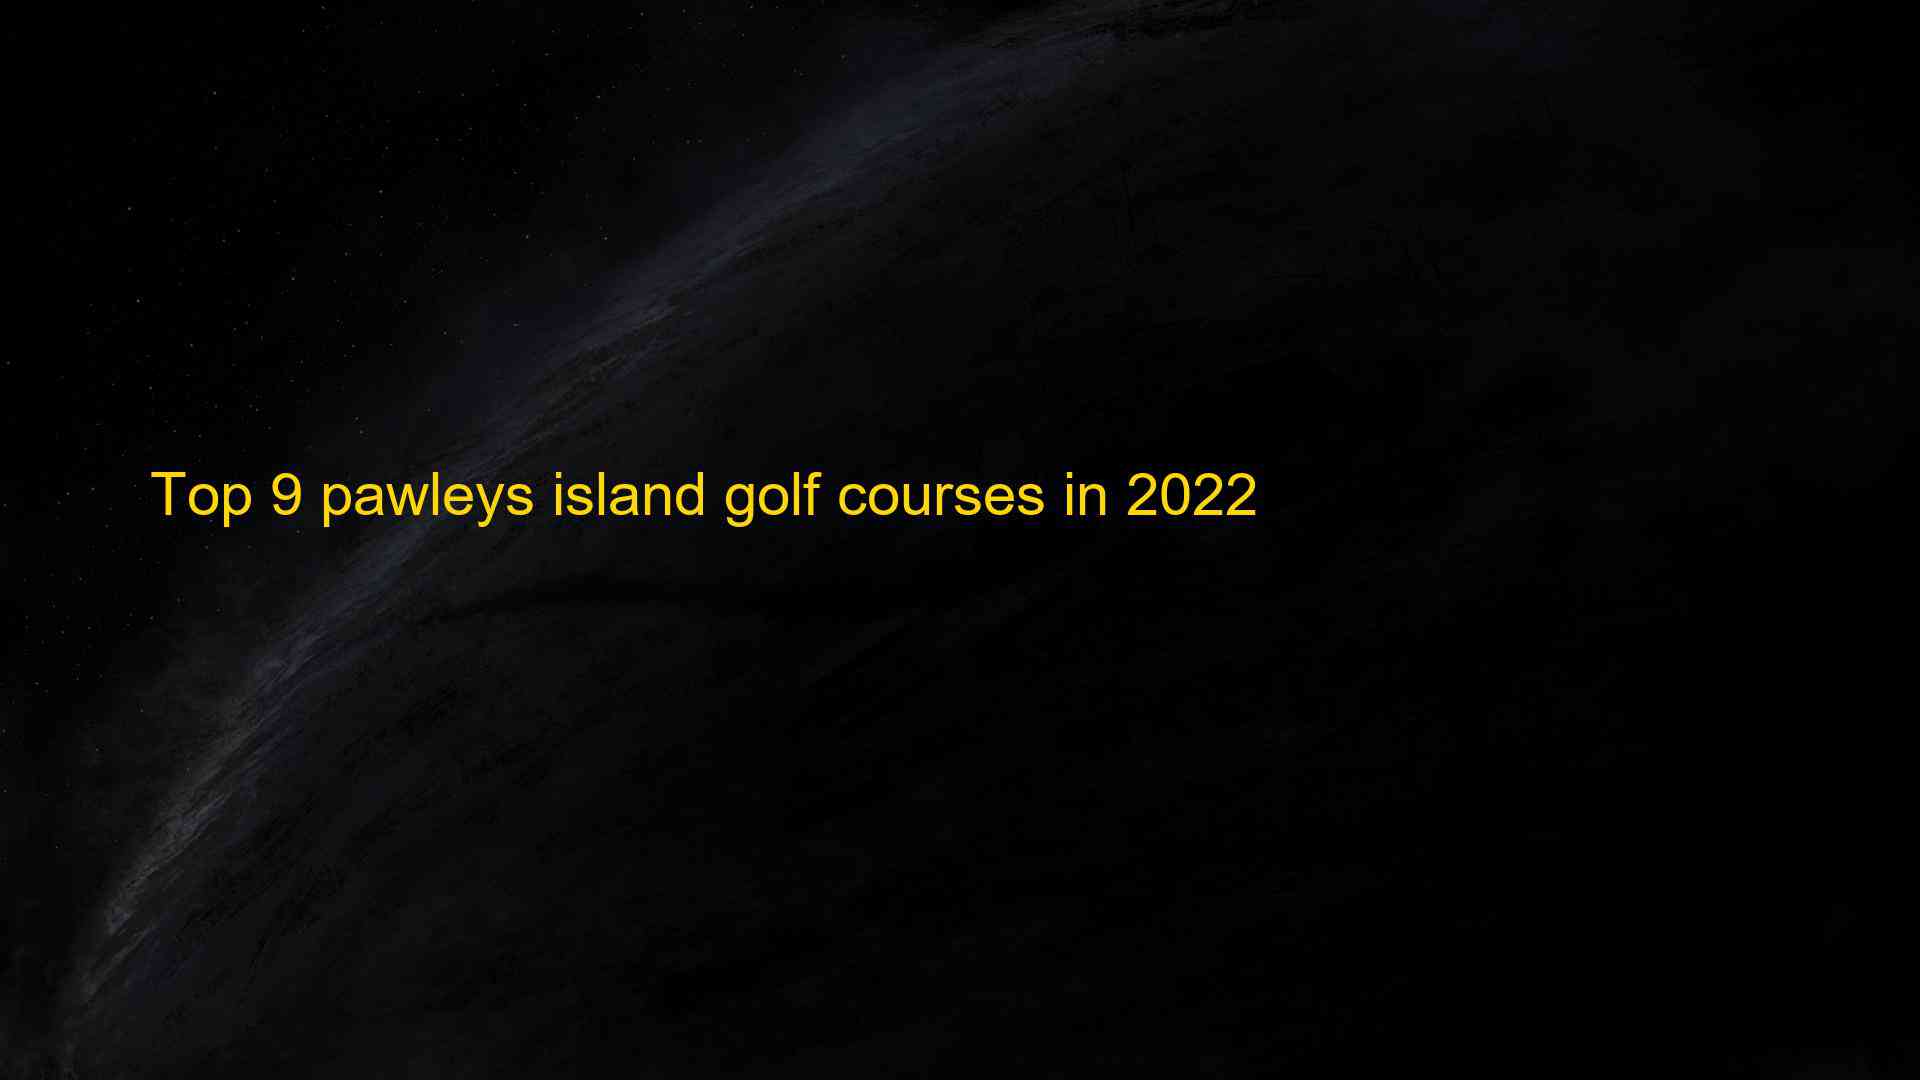 Top 9 pawleys island golf courses in 2022 1660904102